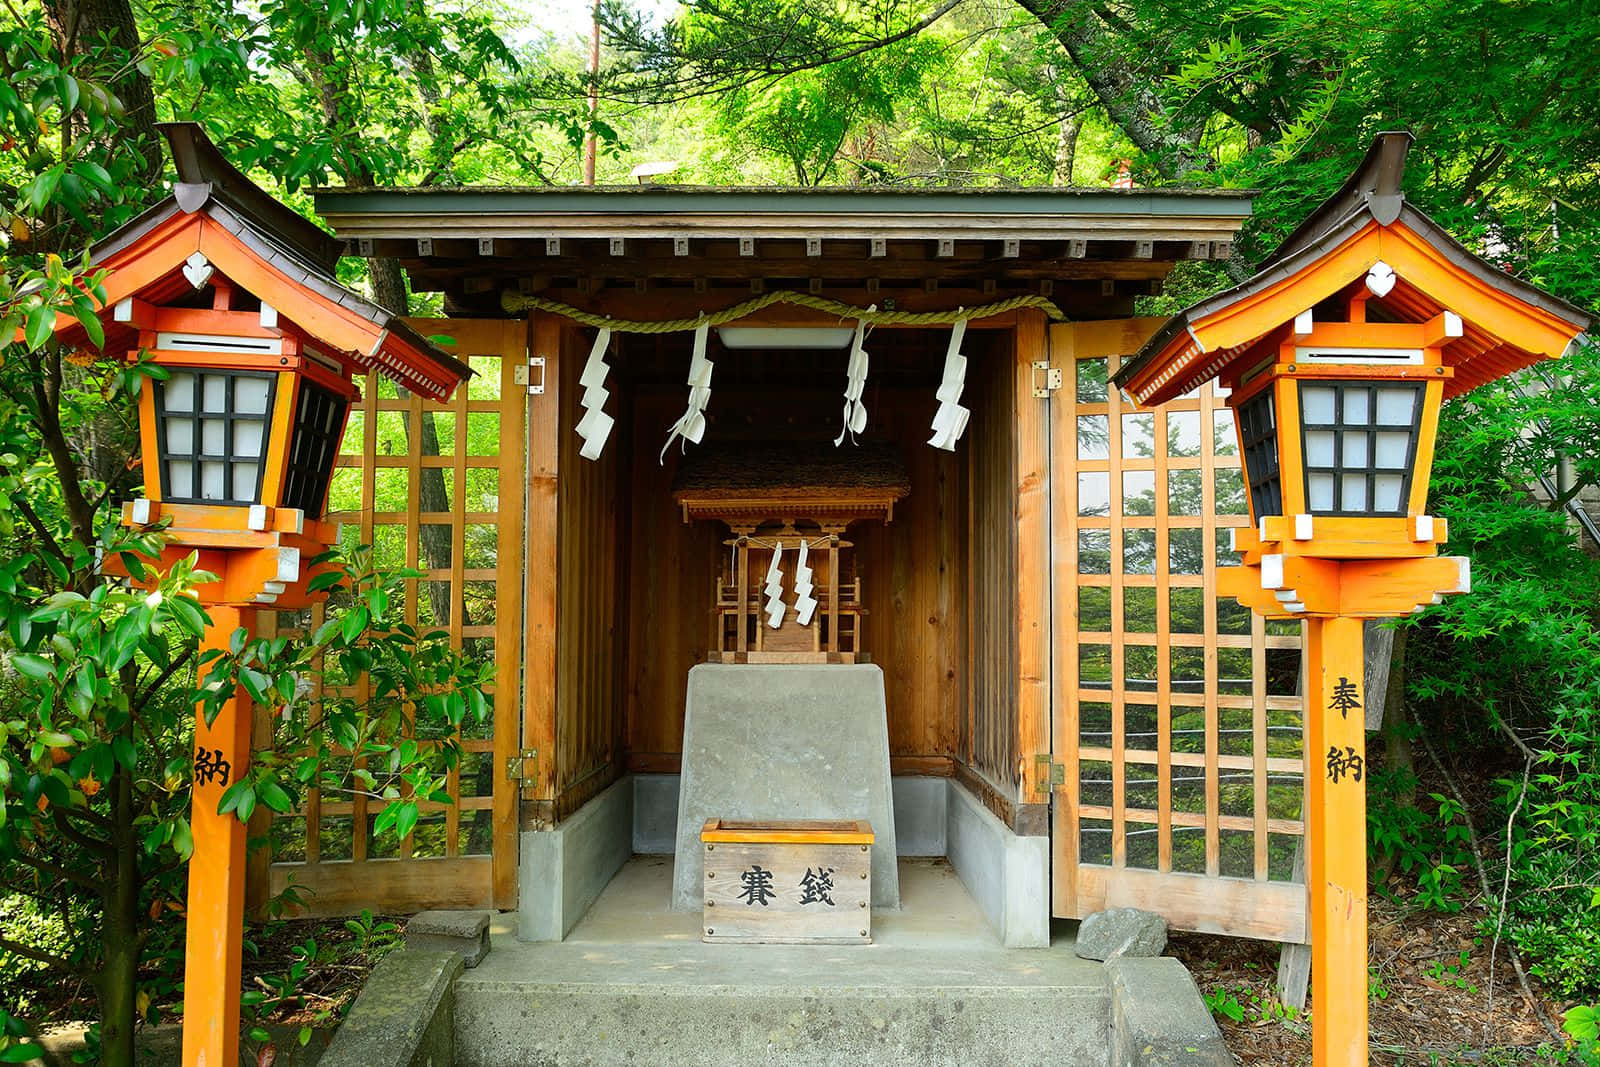 A serene Shinto shrine surrounded by a lush forest Wallpaper